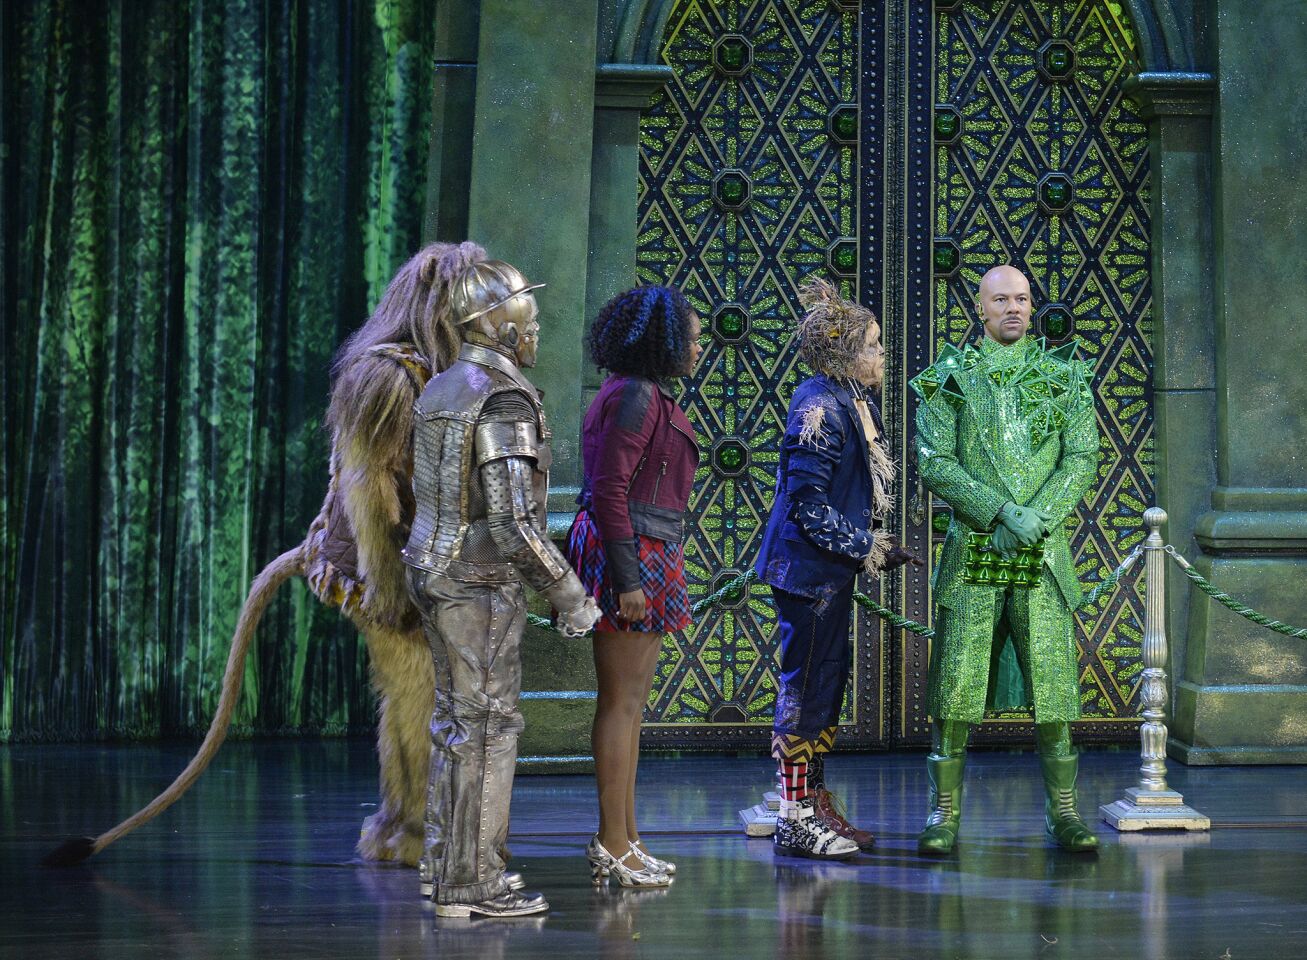 David Alan Grier as Lion, from left, Ne-Yo as Tin-Man, Shanice Williams as Dorothy, Elijah Kelley as Scarecrow and Common as the Bouncer during a dress rehearsal of "The Wiz Live!" in New York.